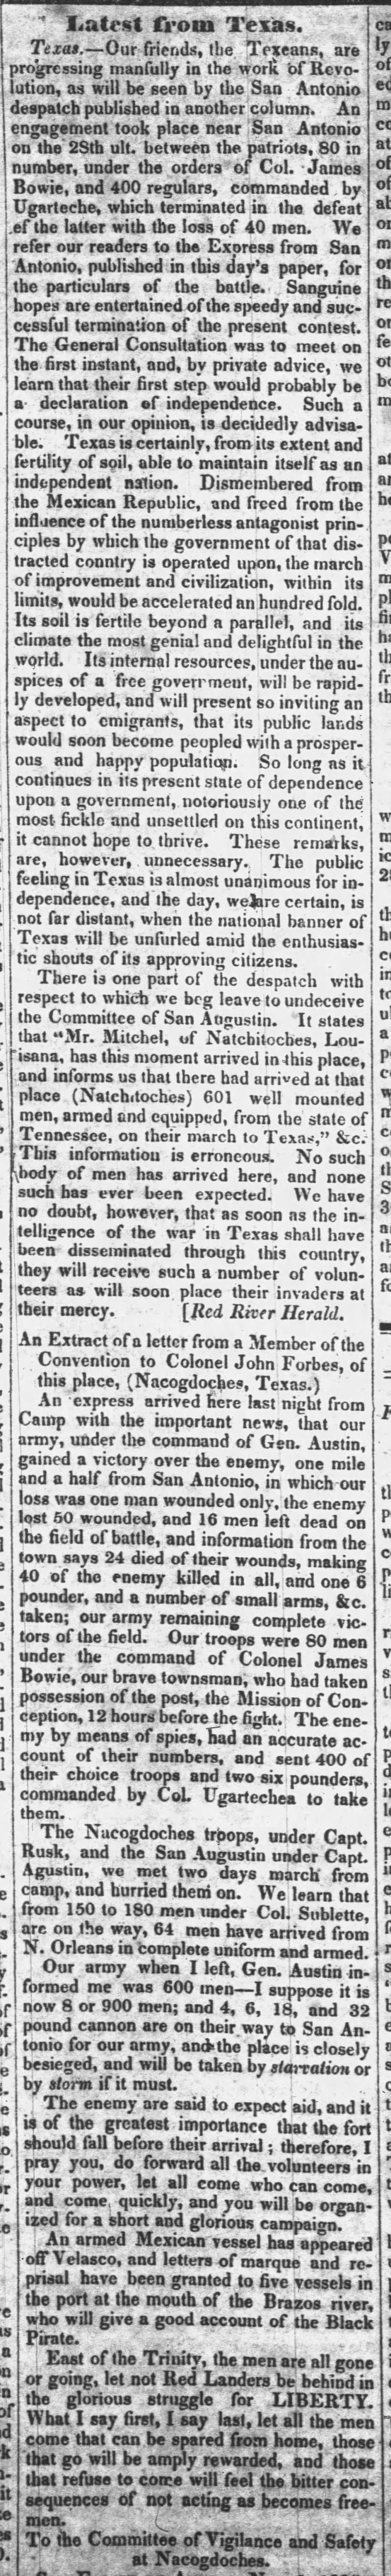 News of a battle during the Texas Revolution; Texans are "almost unanimous for independence"